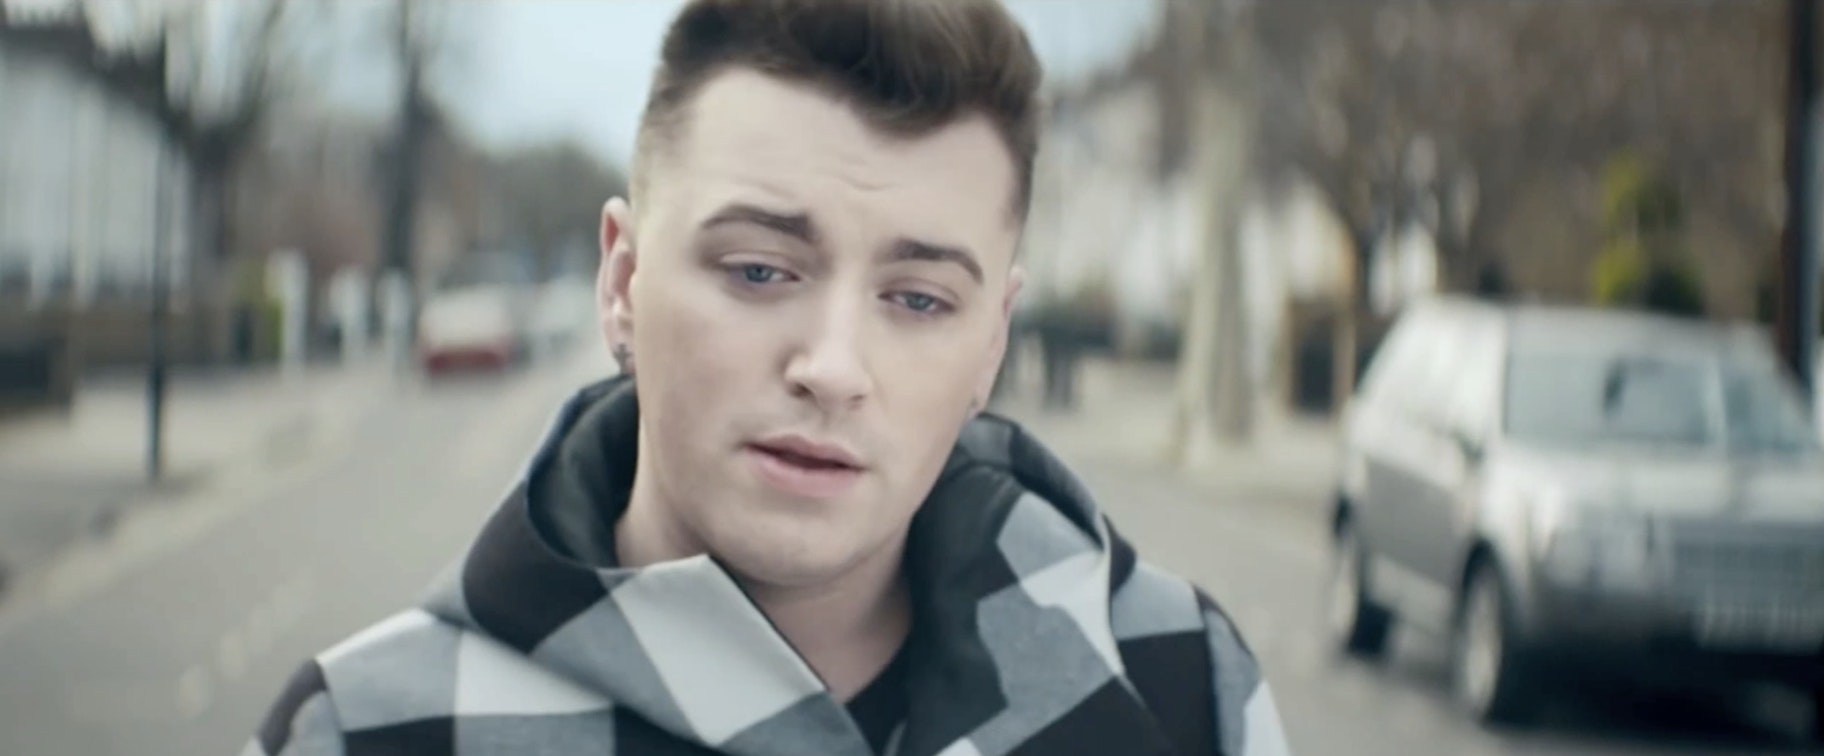 Sam Smith—Stay With Me -